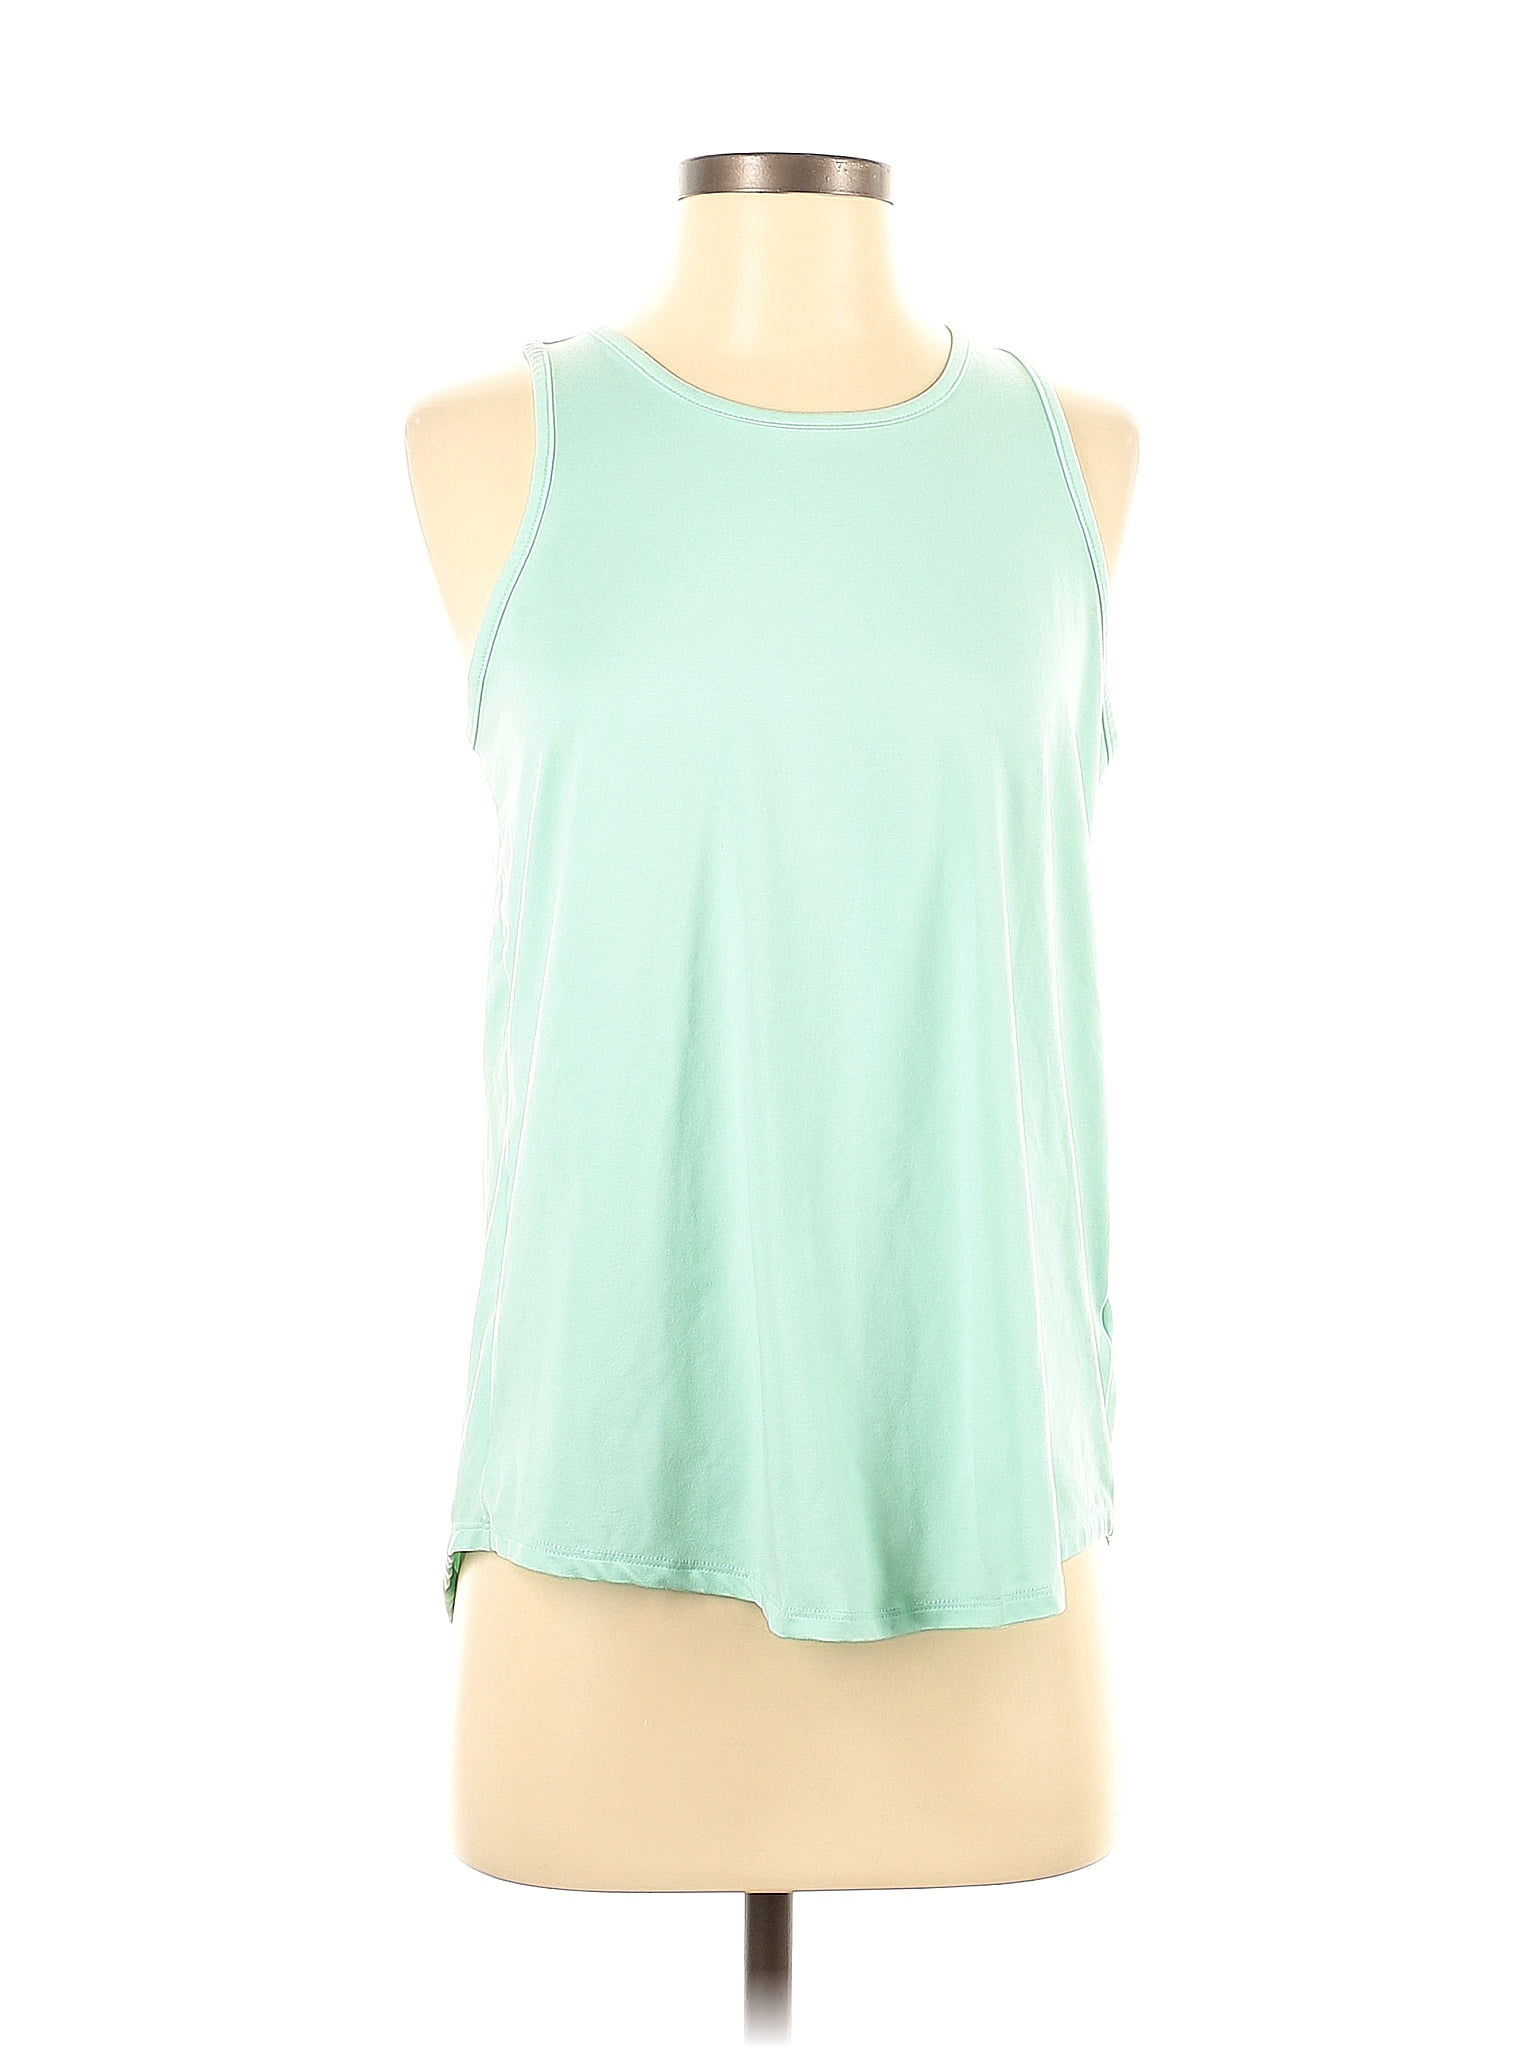 Zelos Green Active Tank Size S - 59% off